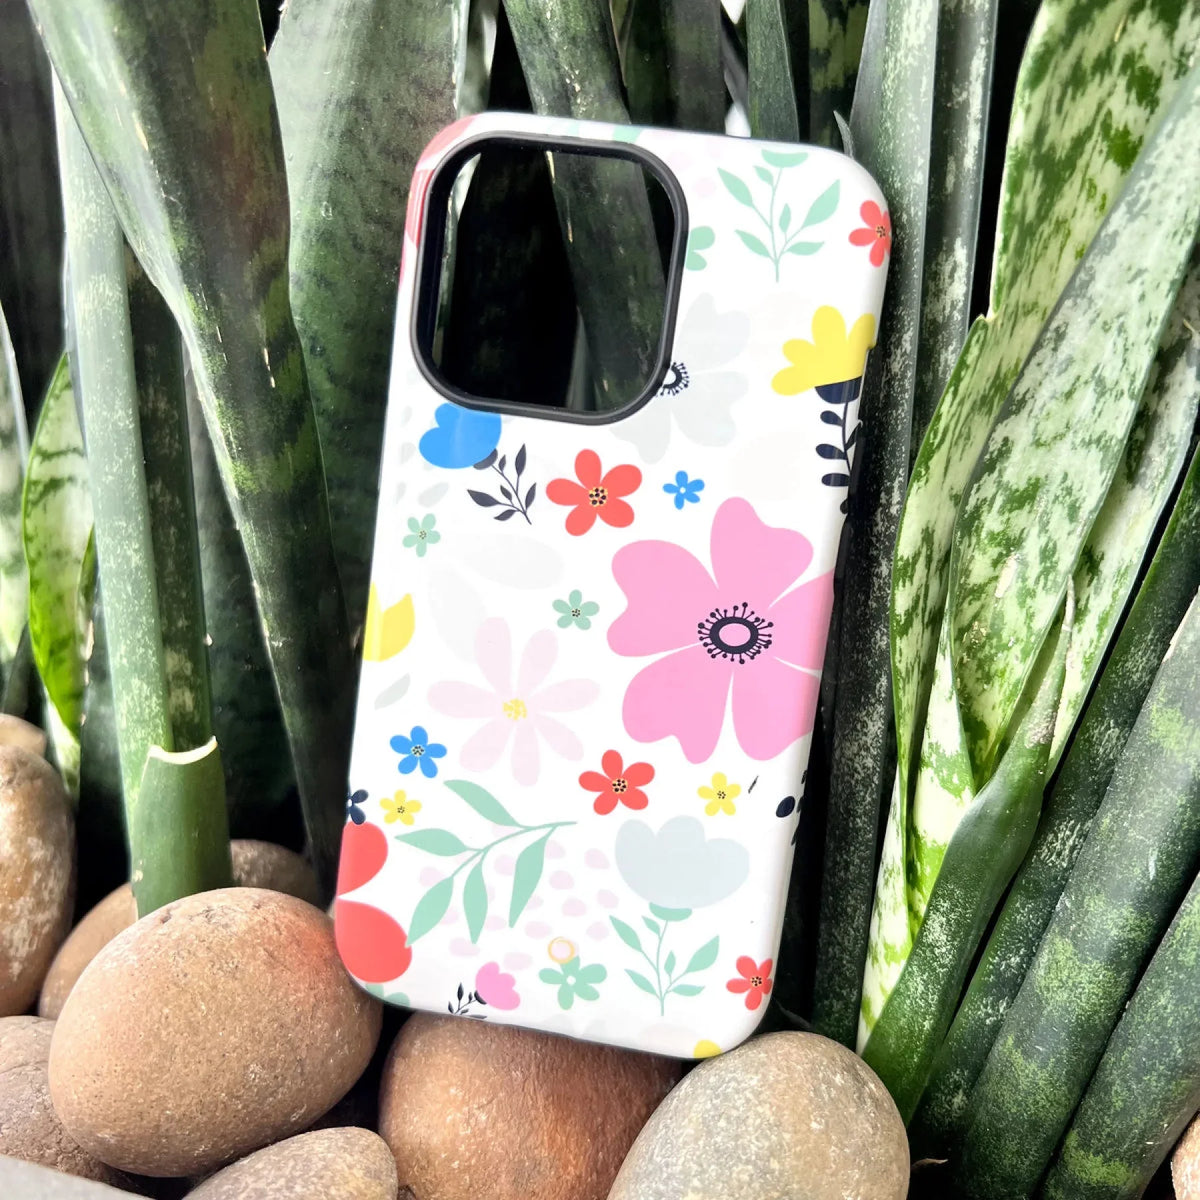 Flower Power iPhone Case - iPhone 11 Pro Cases